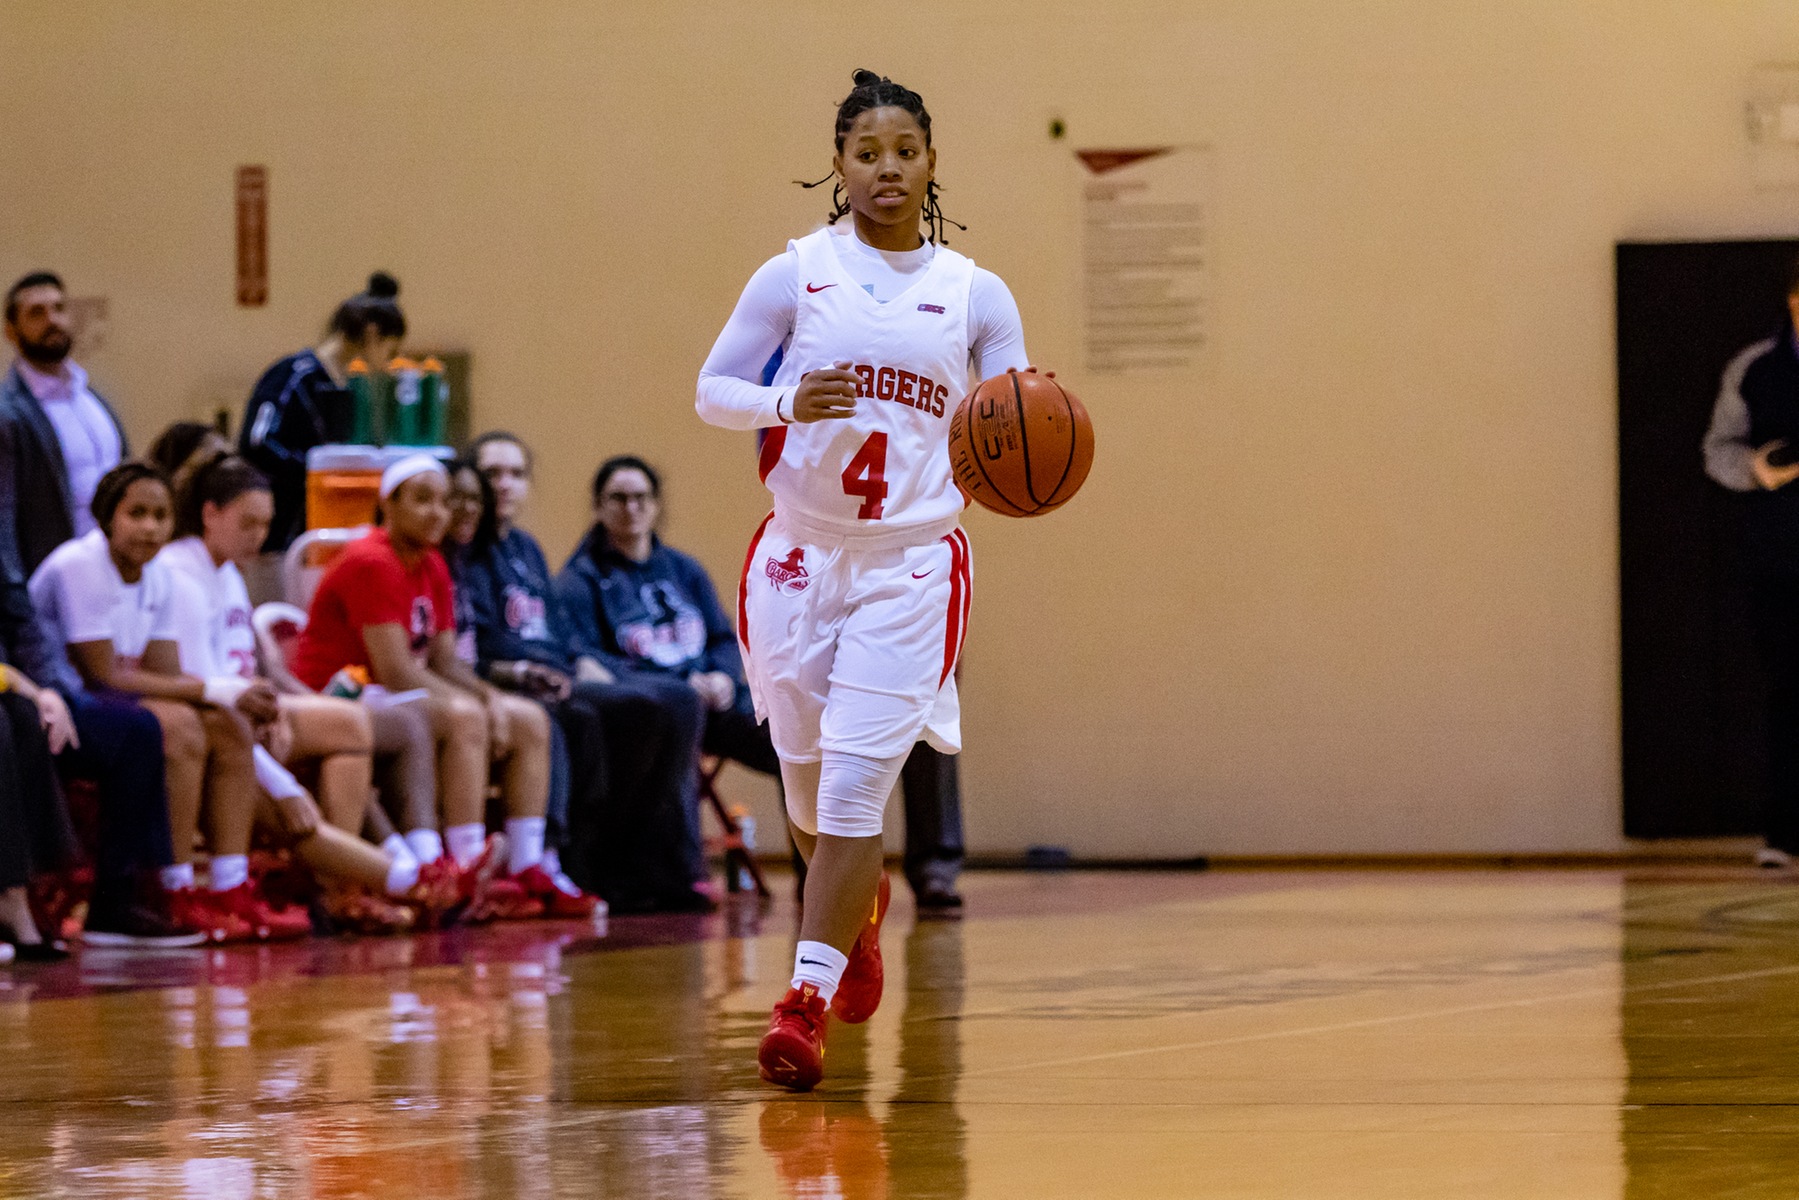 LADY CHARGERS EDGED BY ST MICHAEL'S COLLEGE